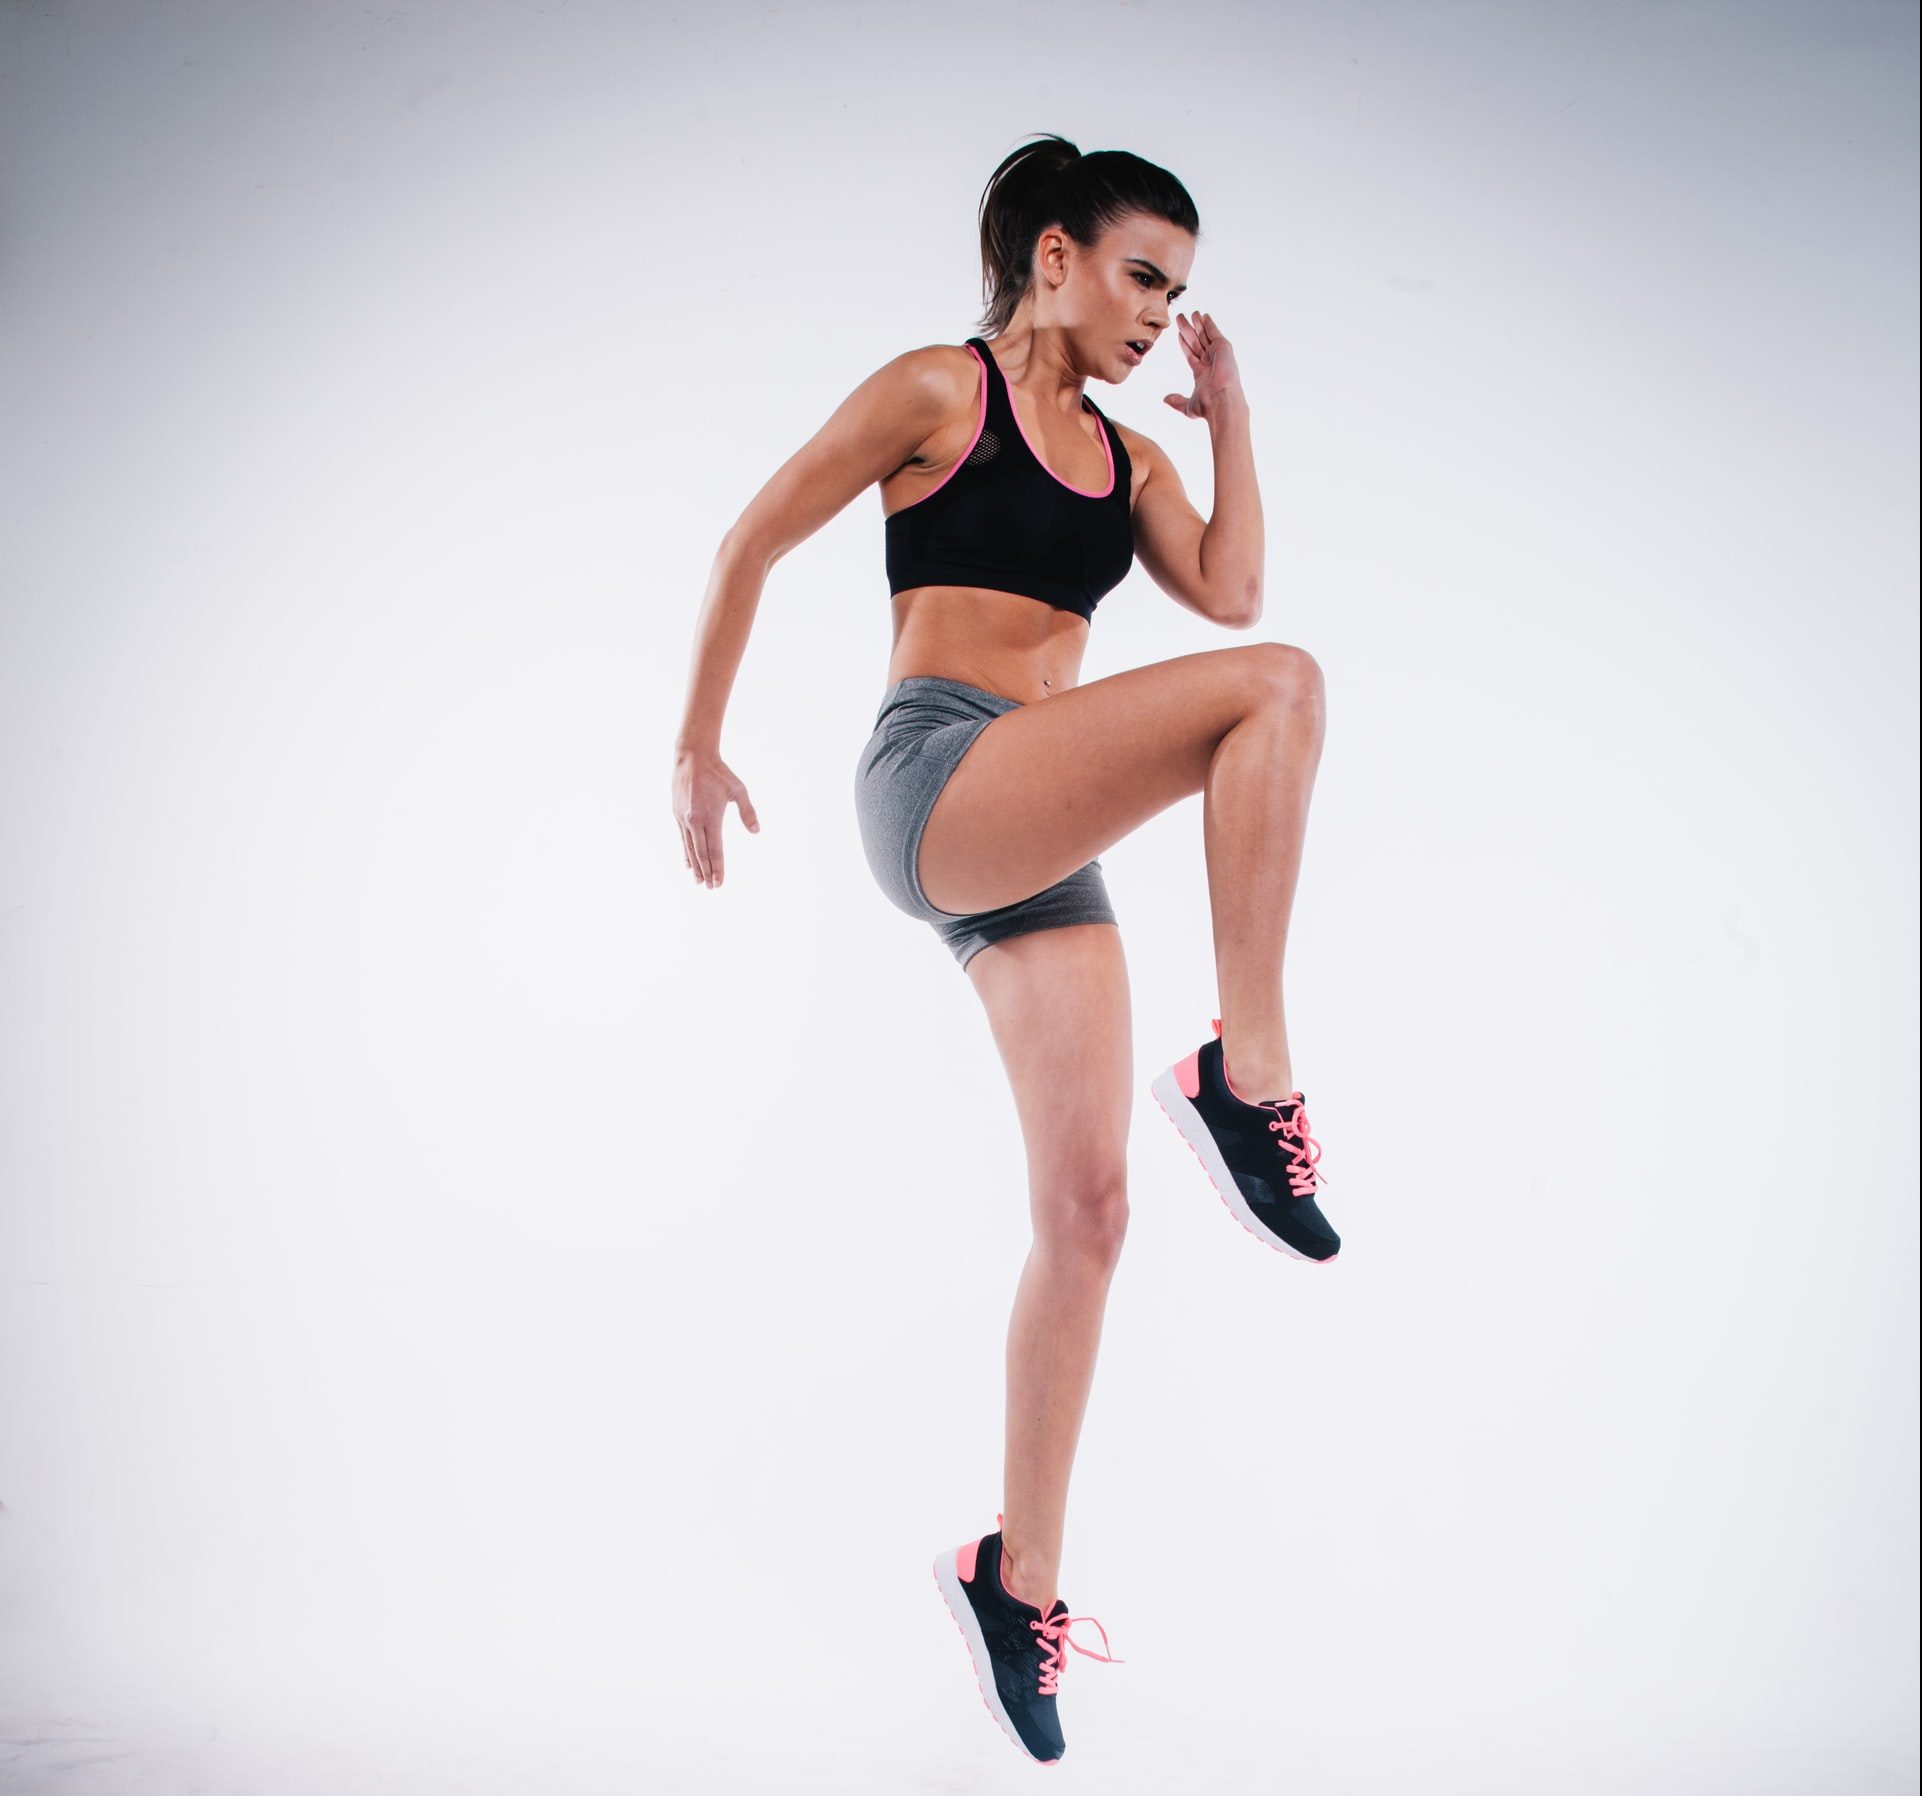 Tabata for women – what does a sample workout plan look like?